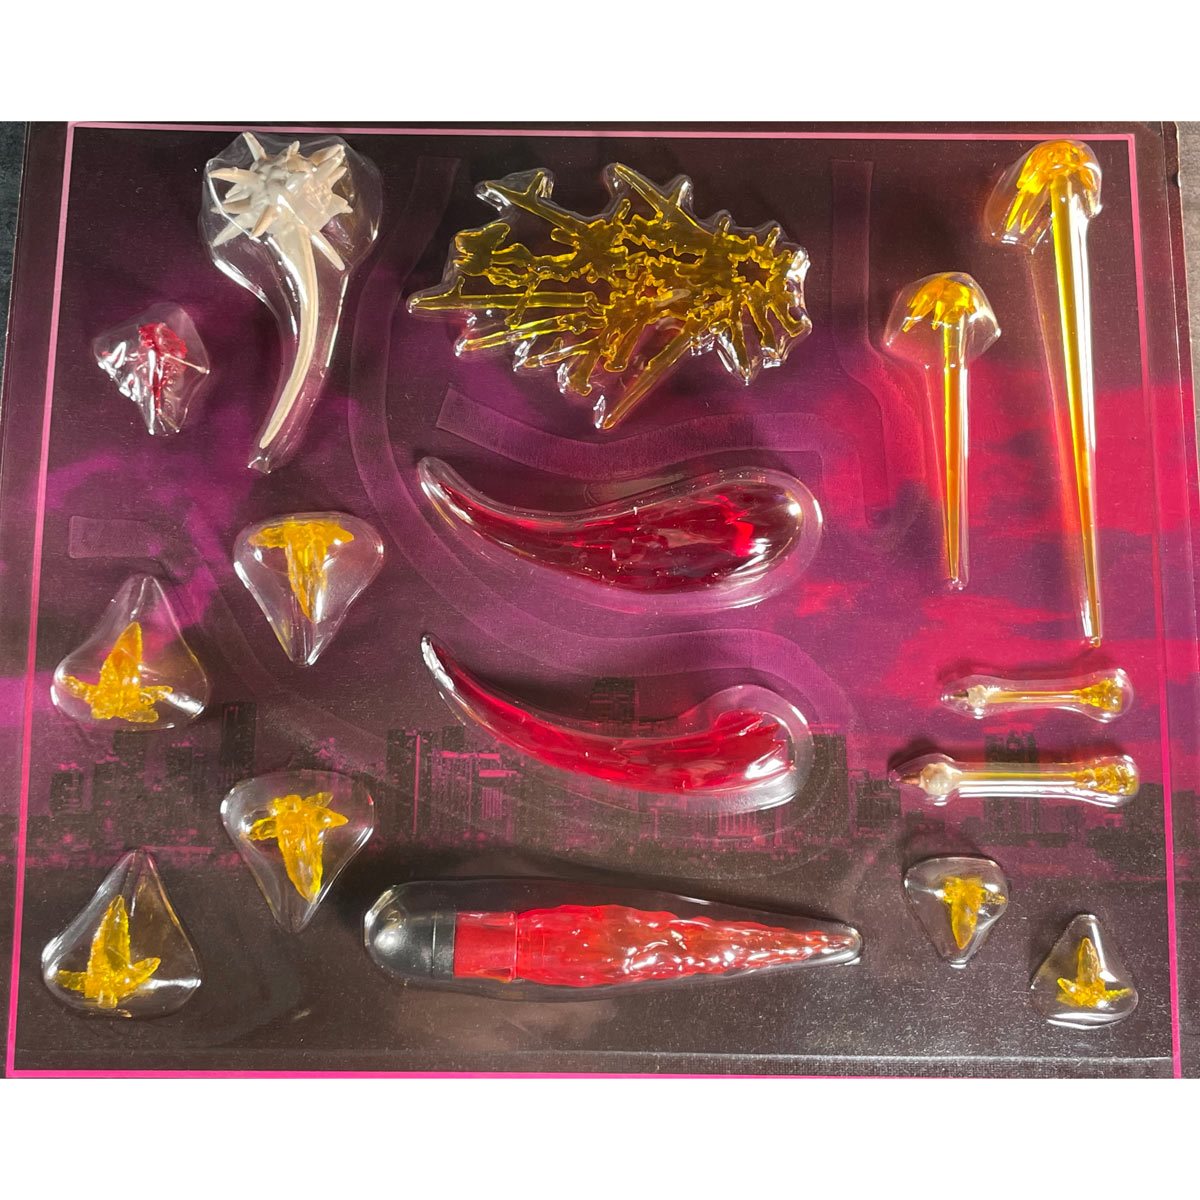 Super Action Stuff!! Fire Power Action Figure Accessories – Yummy